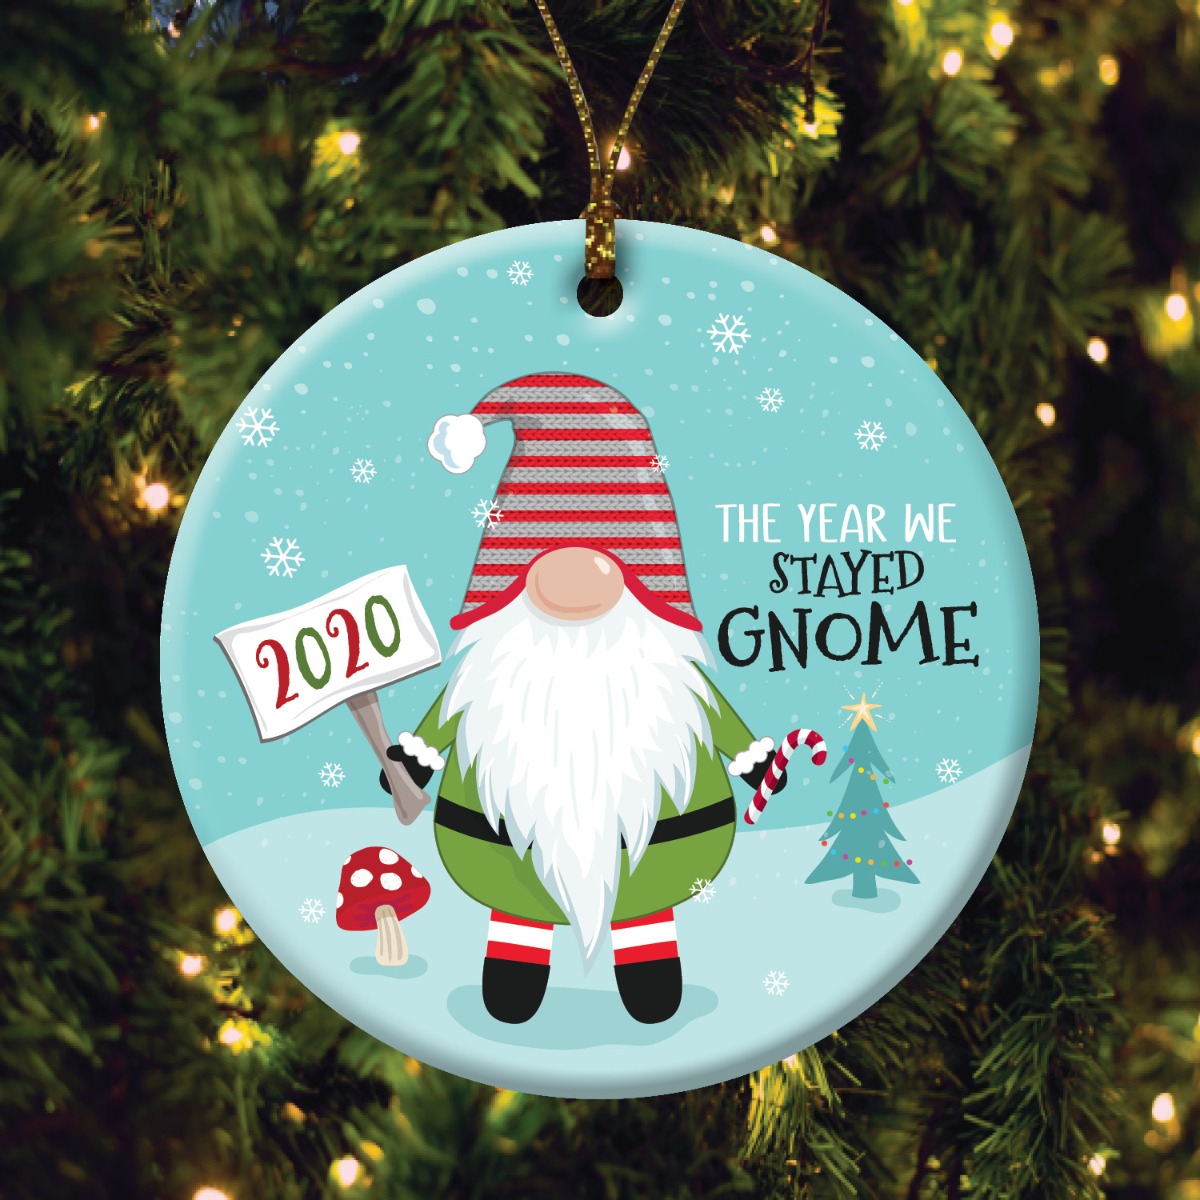 2020 The Year We Stayed Gnome Ceramic Ornament